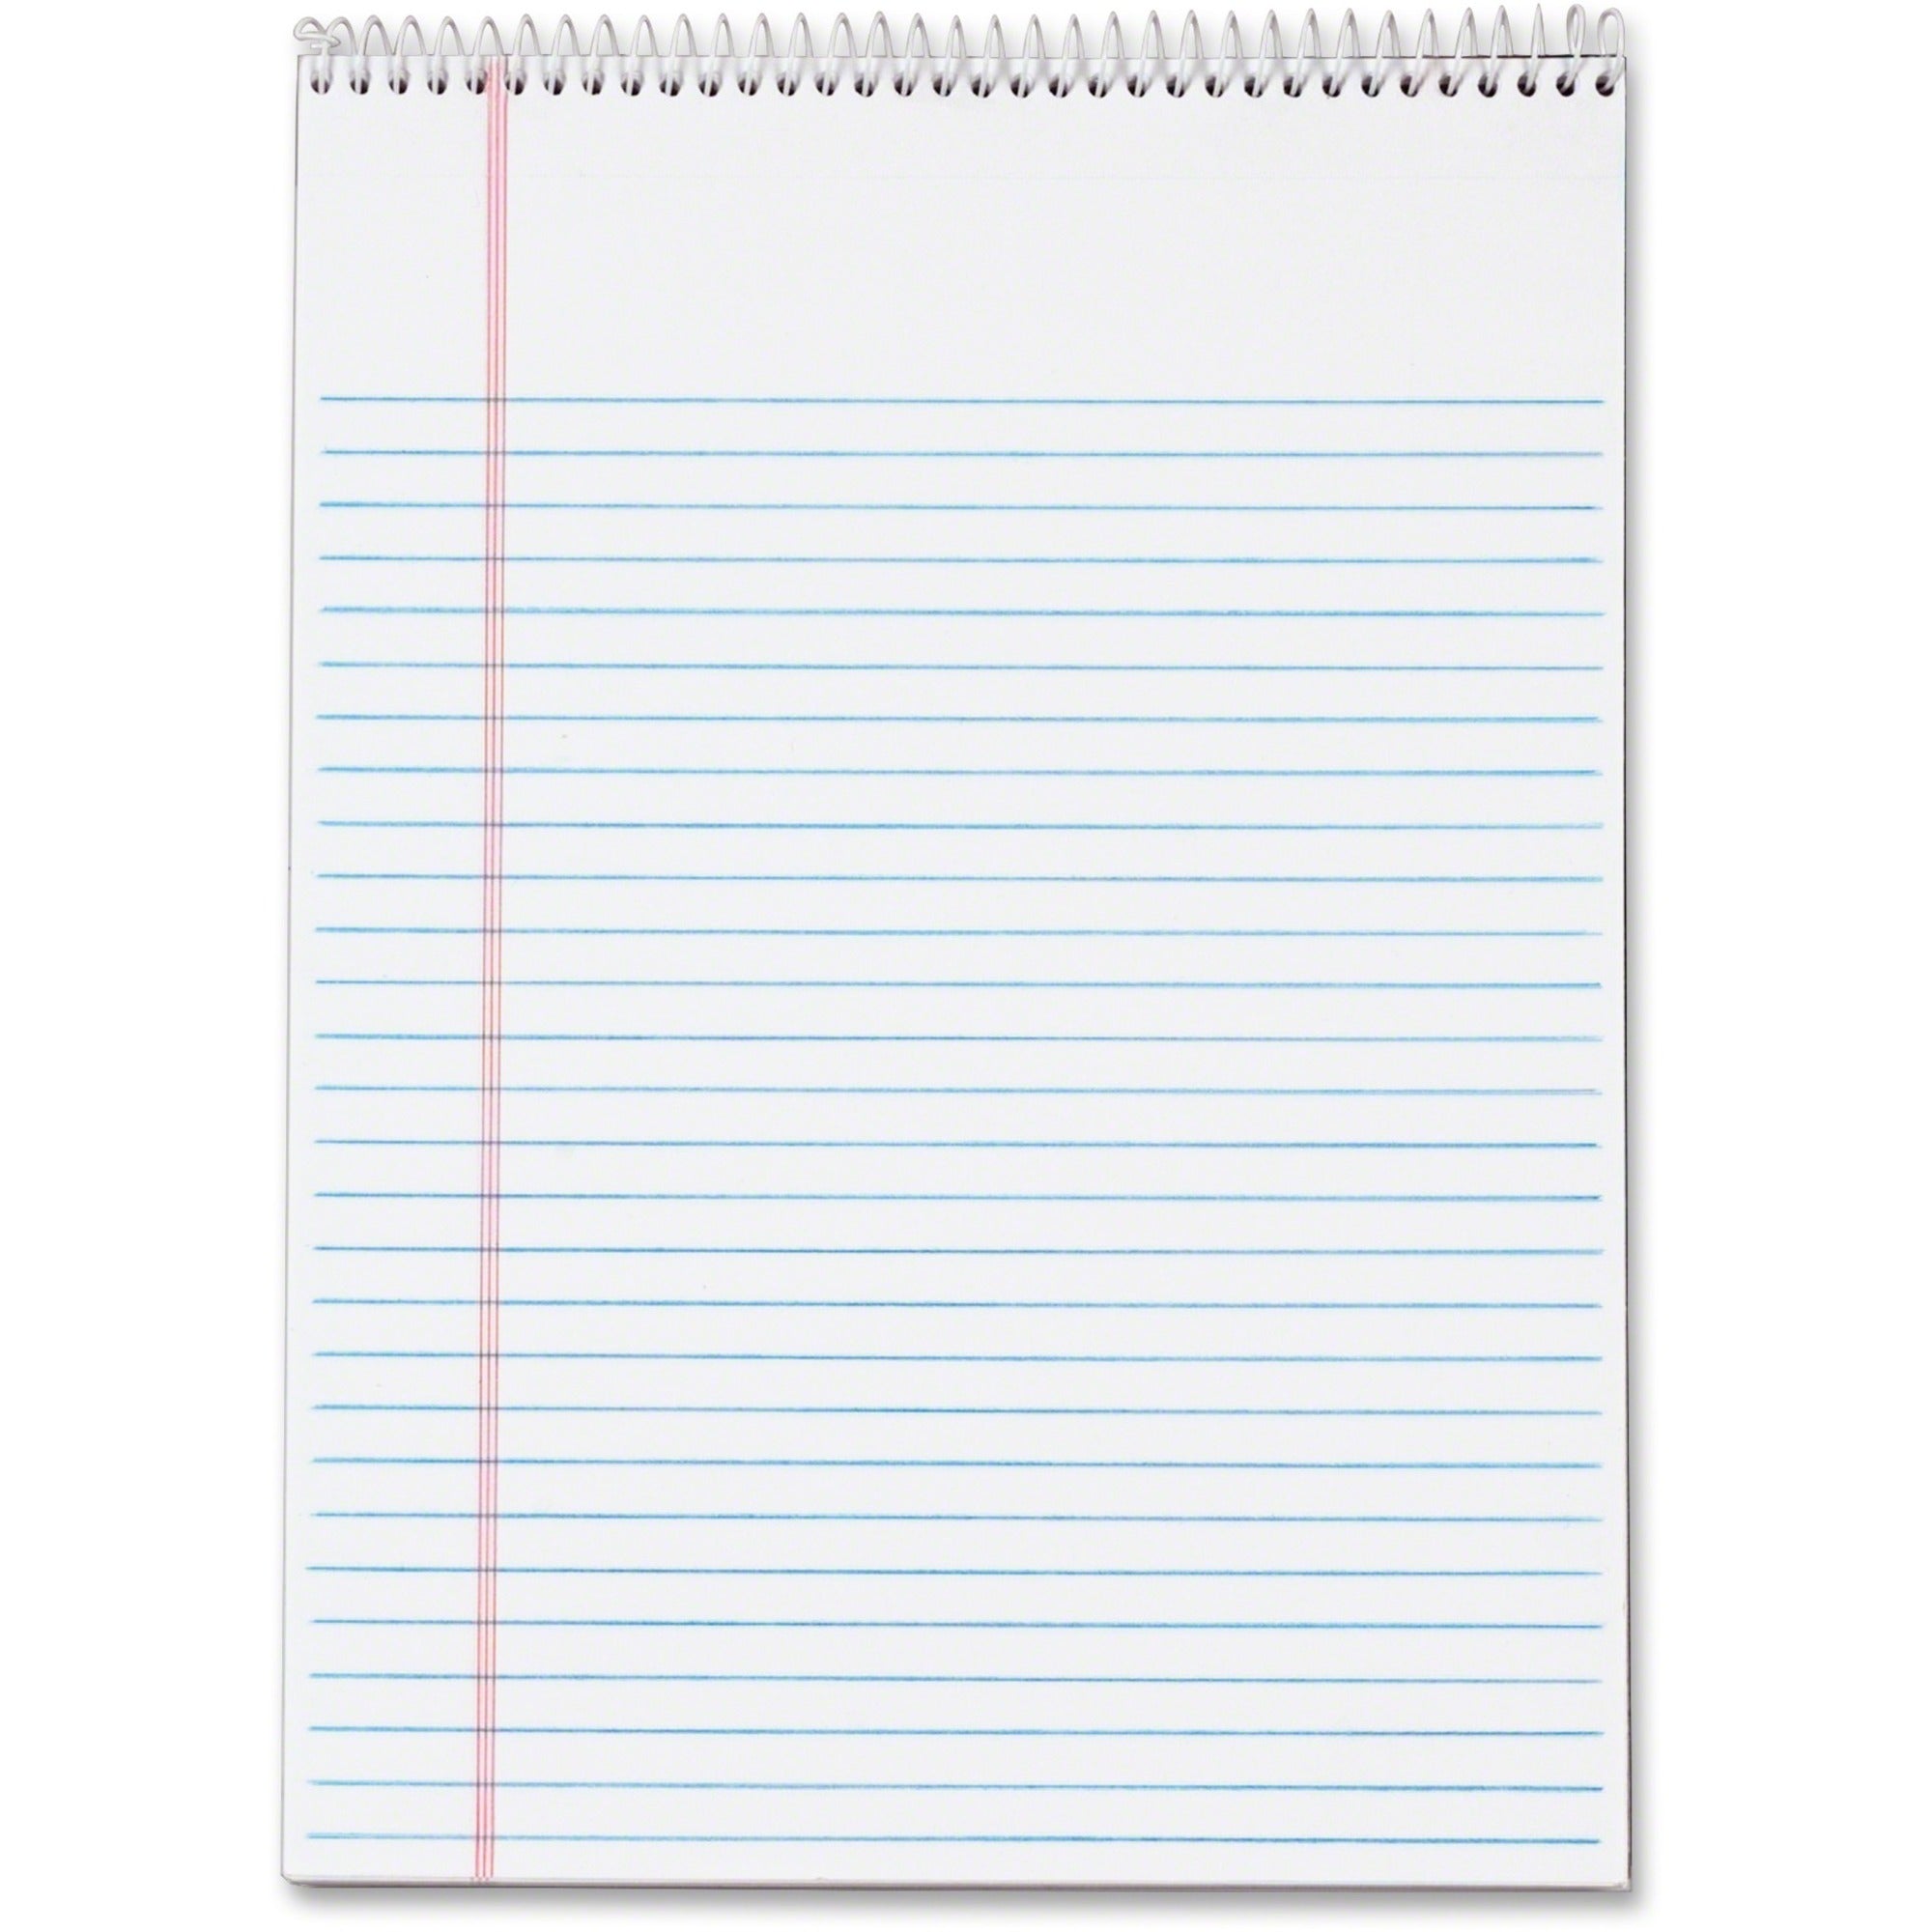 TOPS Docket Wirebound Legal Writing Pads - Letter - 70 Sheets - Wire Bound - 0.34" Ruled - 16 lb Basis Weight - Letter - 8 1/2" x 11" - 11" x 8.5" - White Paper - Perforated, Hard Cover, Stiff-back, Spiral Lock - 3 / Pack - 